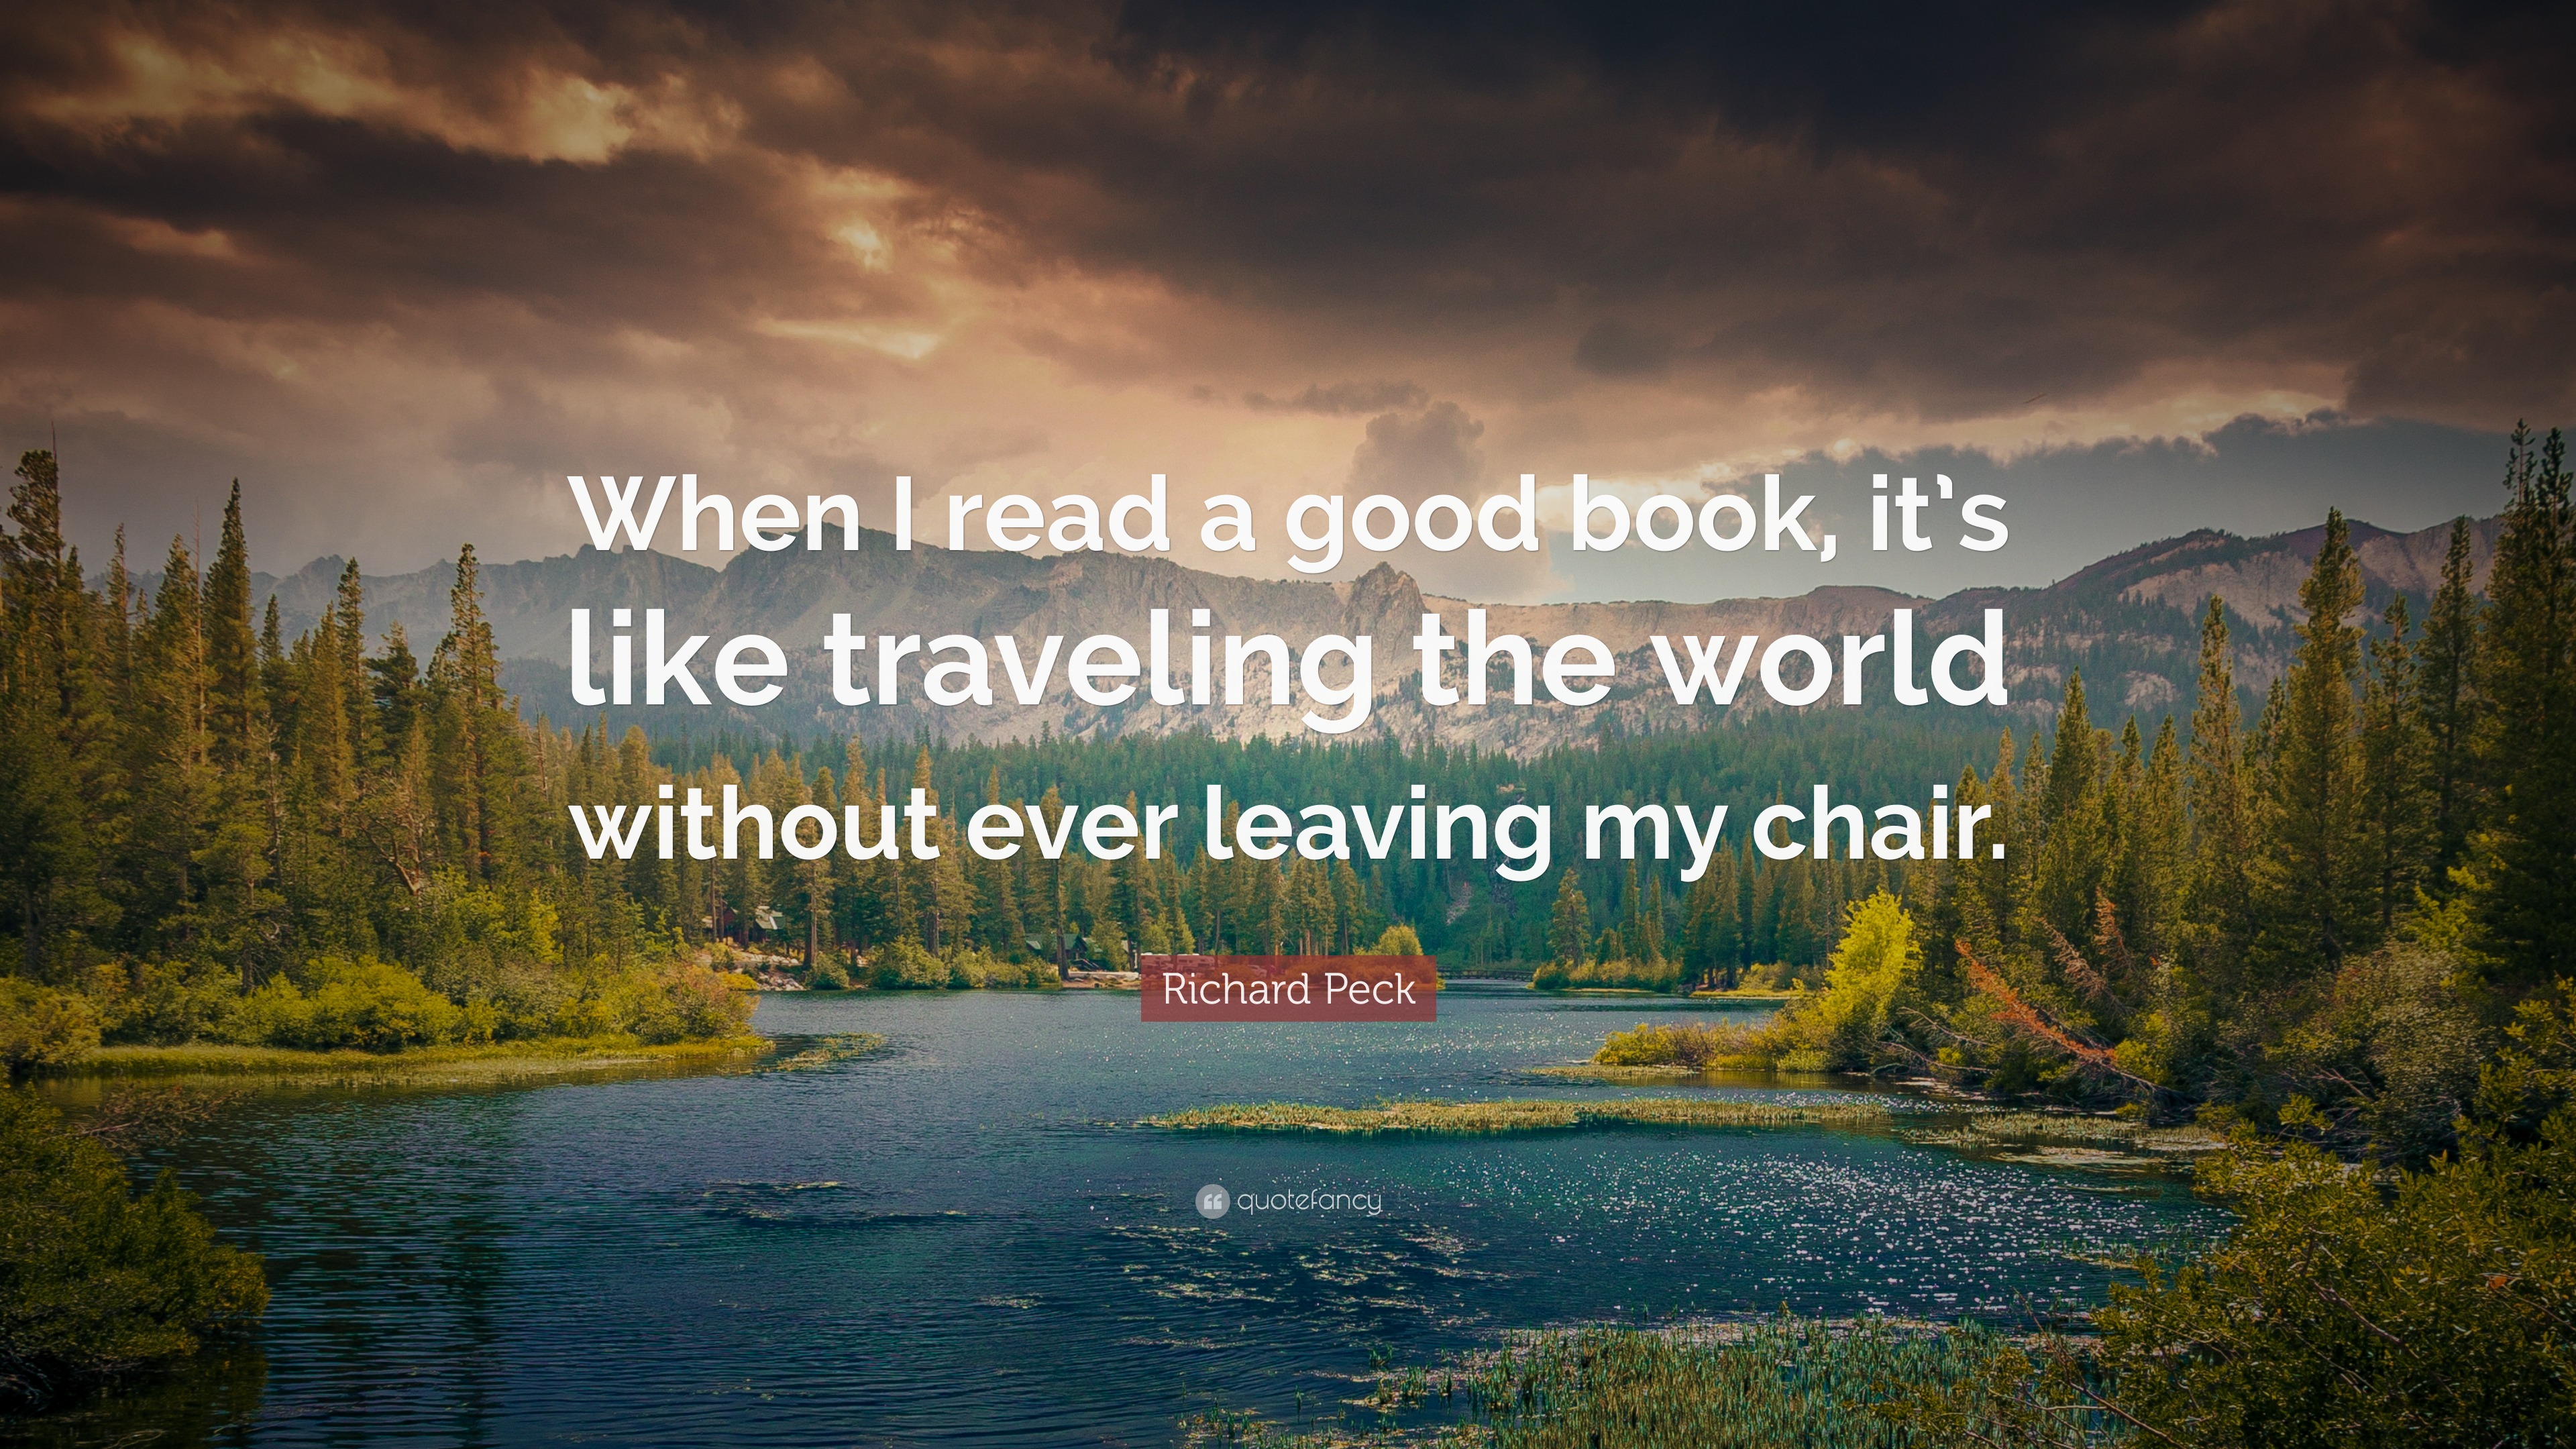 Richard Peck Quote: “When I read a good book, it’s like traveling the